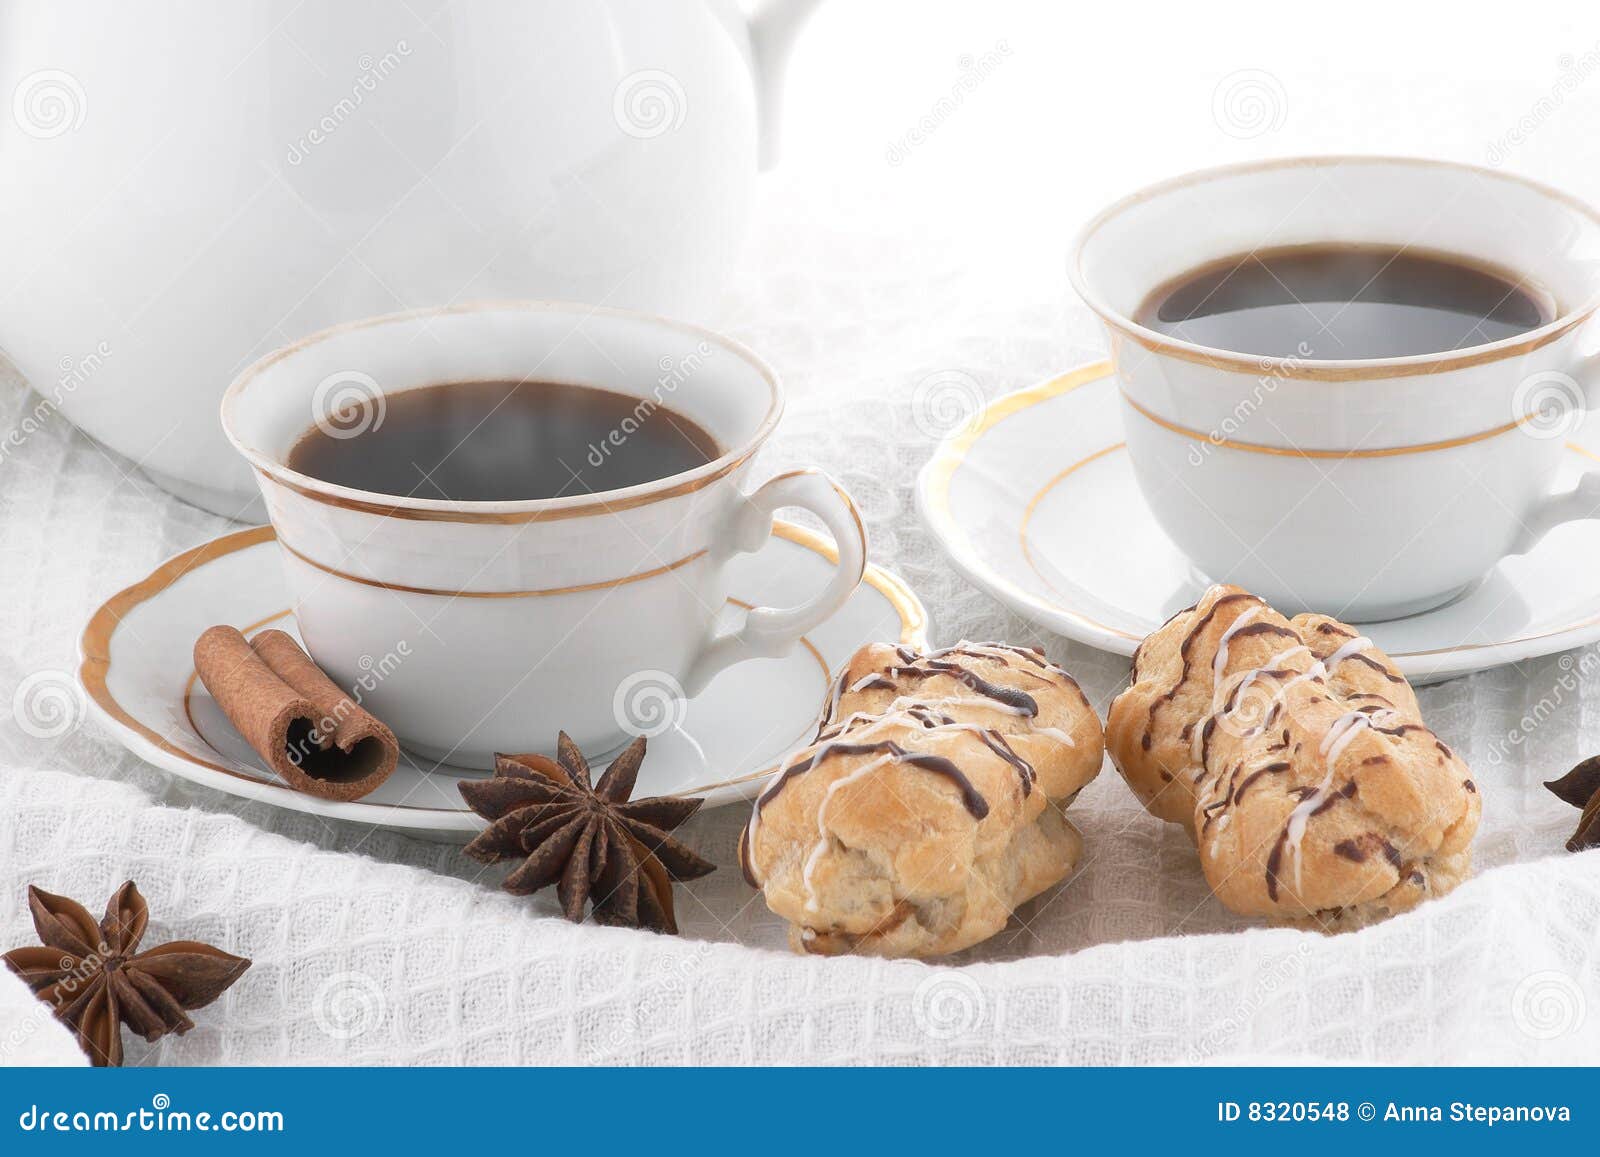 http://thumbs.dreamstime.com/z/coffee-pastry-8320548.jpg